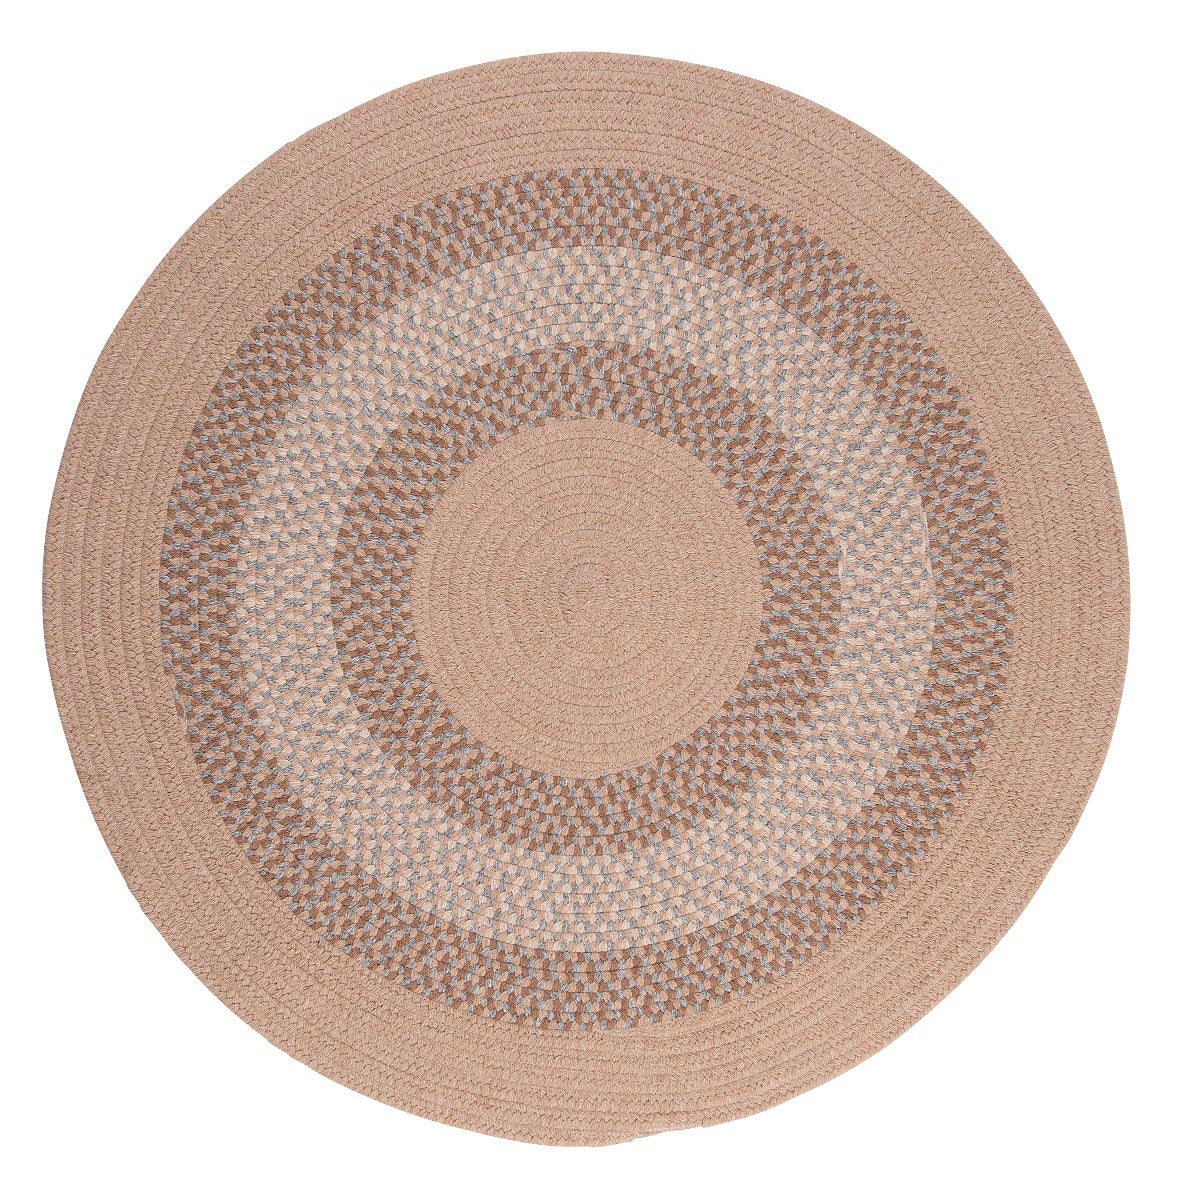 North Ridge Oatmeal Outdoor Braided Round Rugs